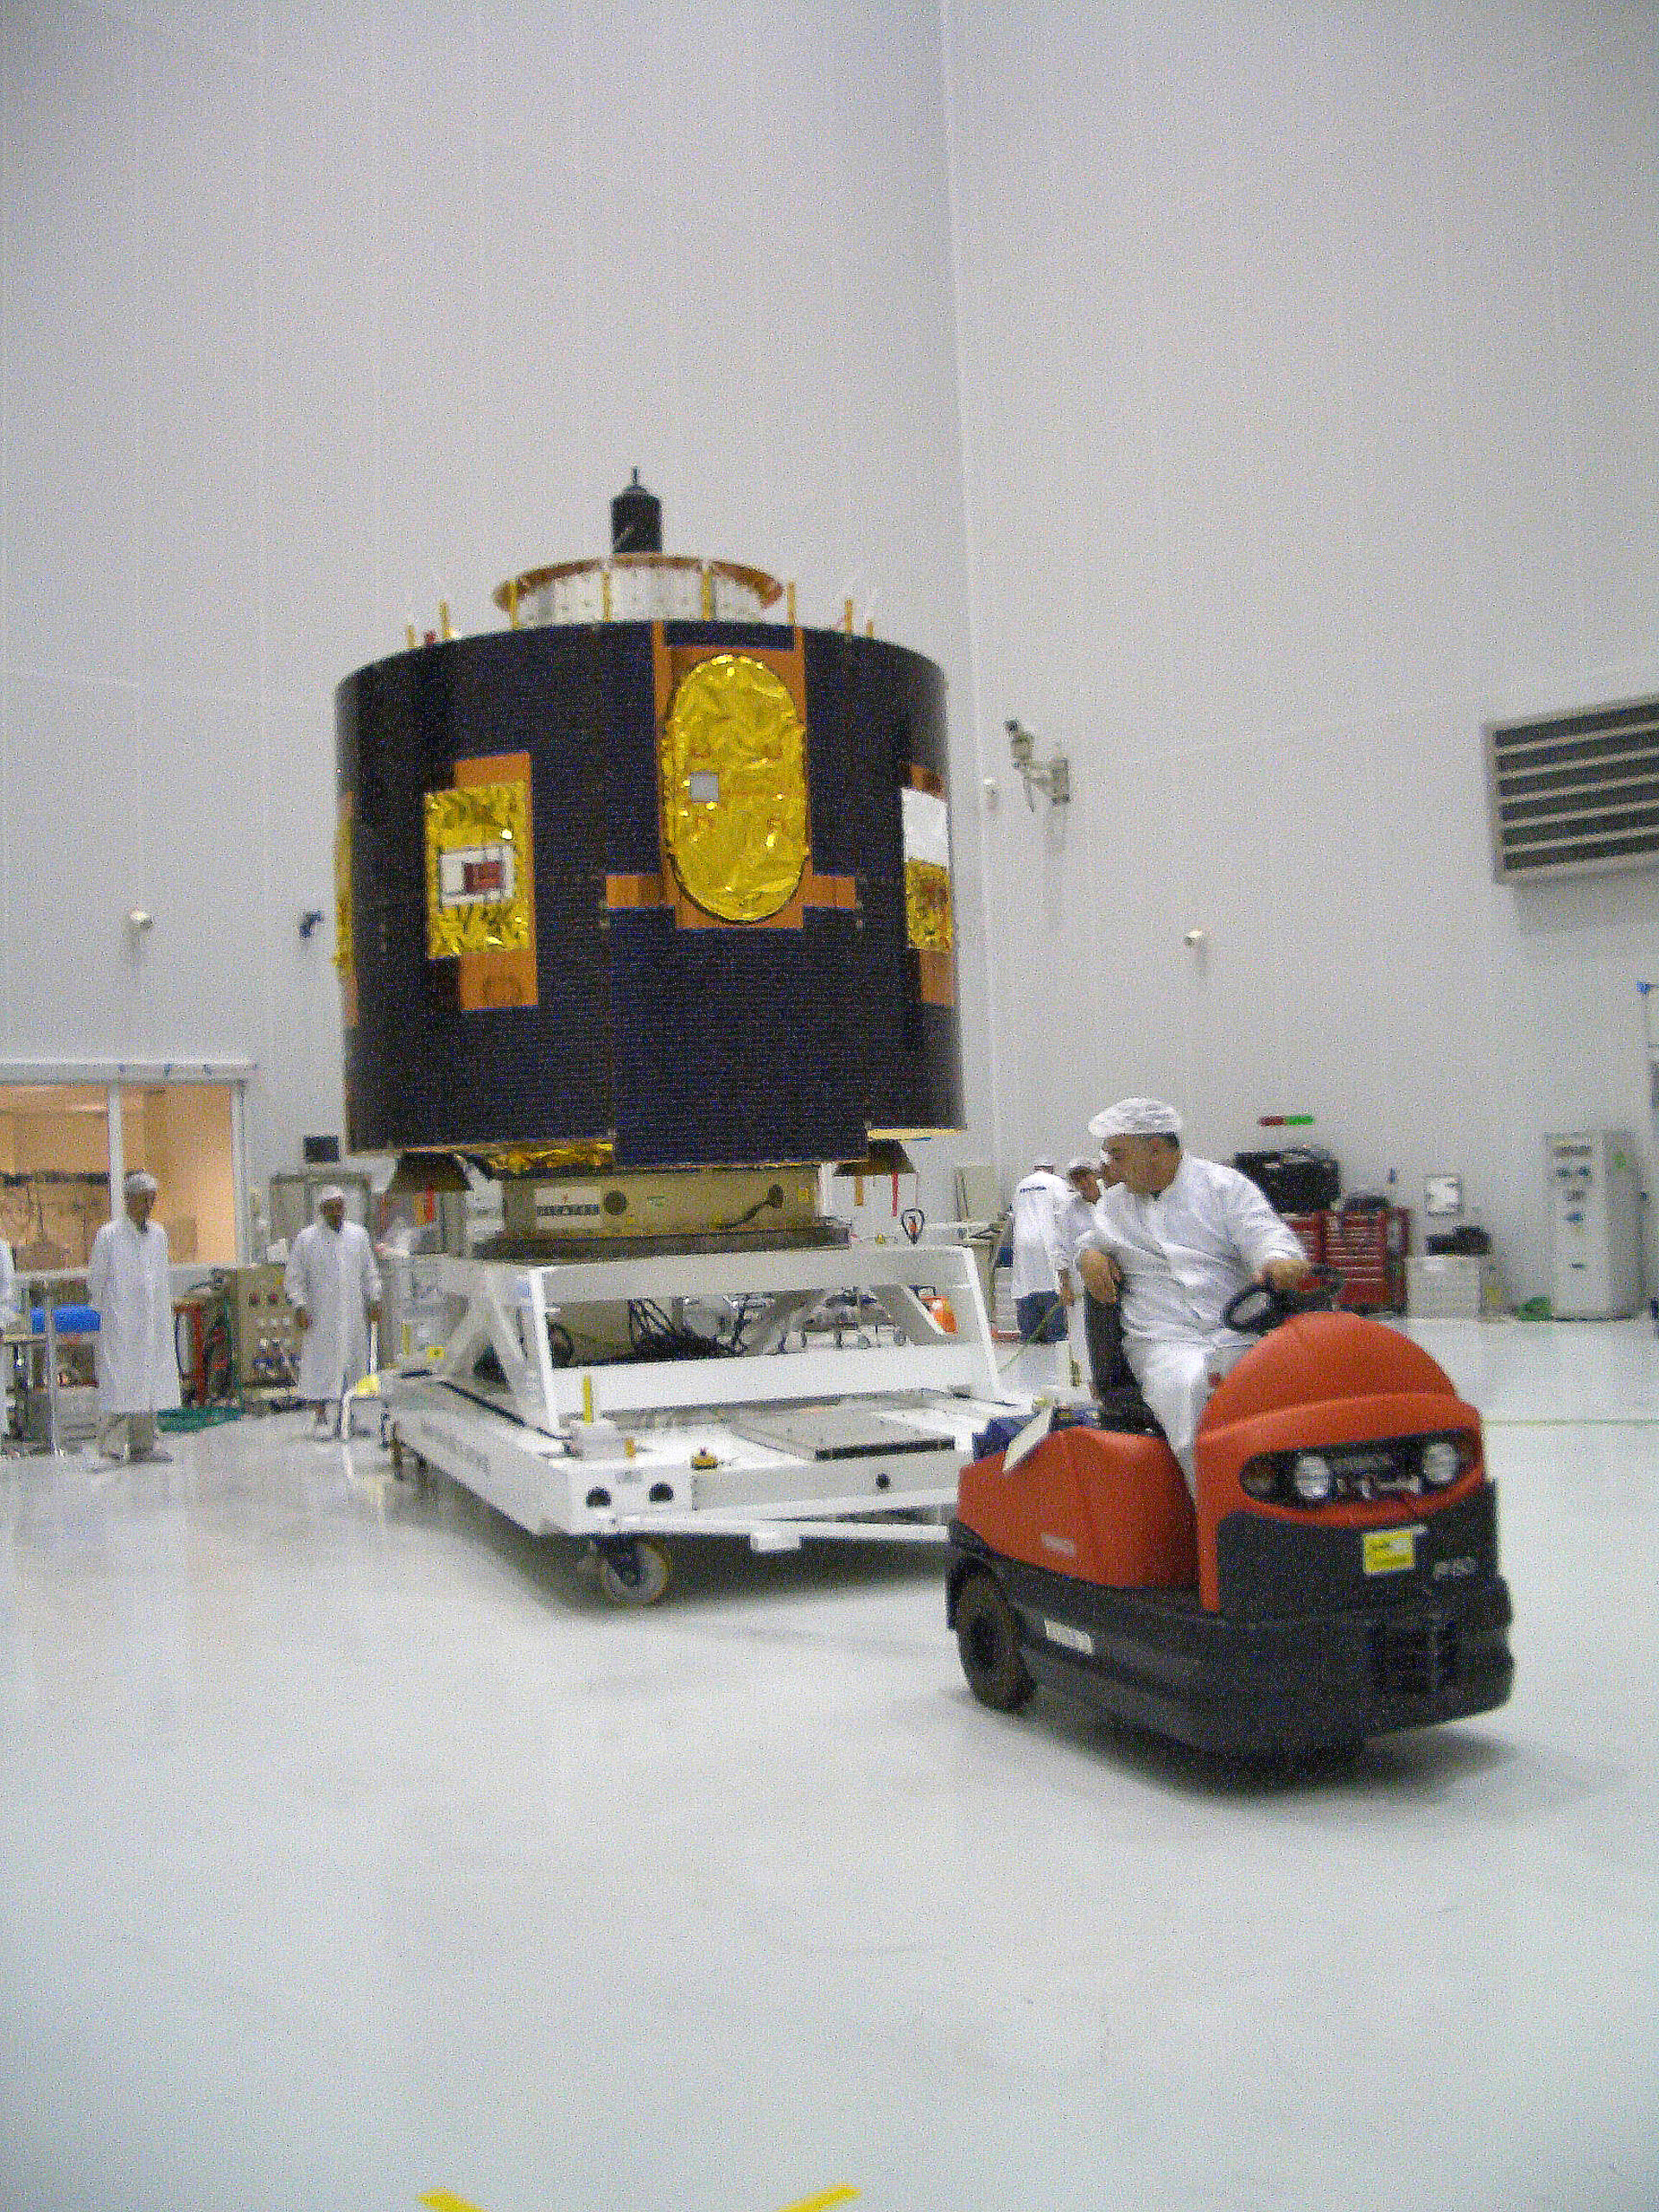 MSG-2 transfer to S5 building